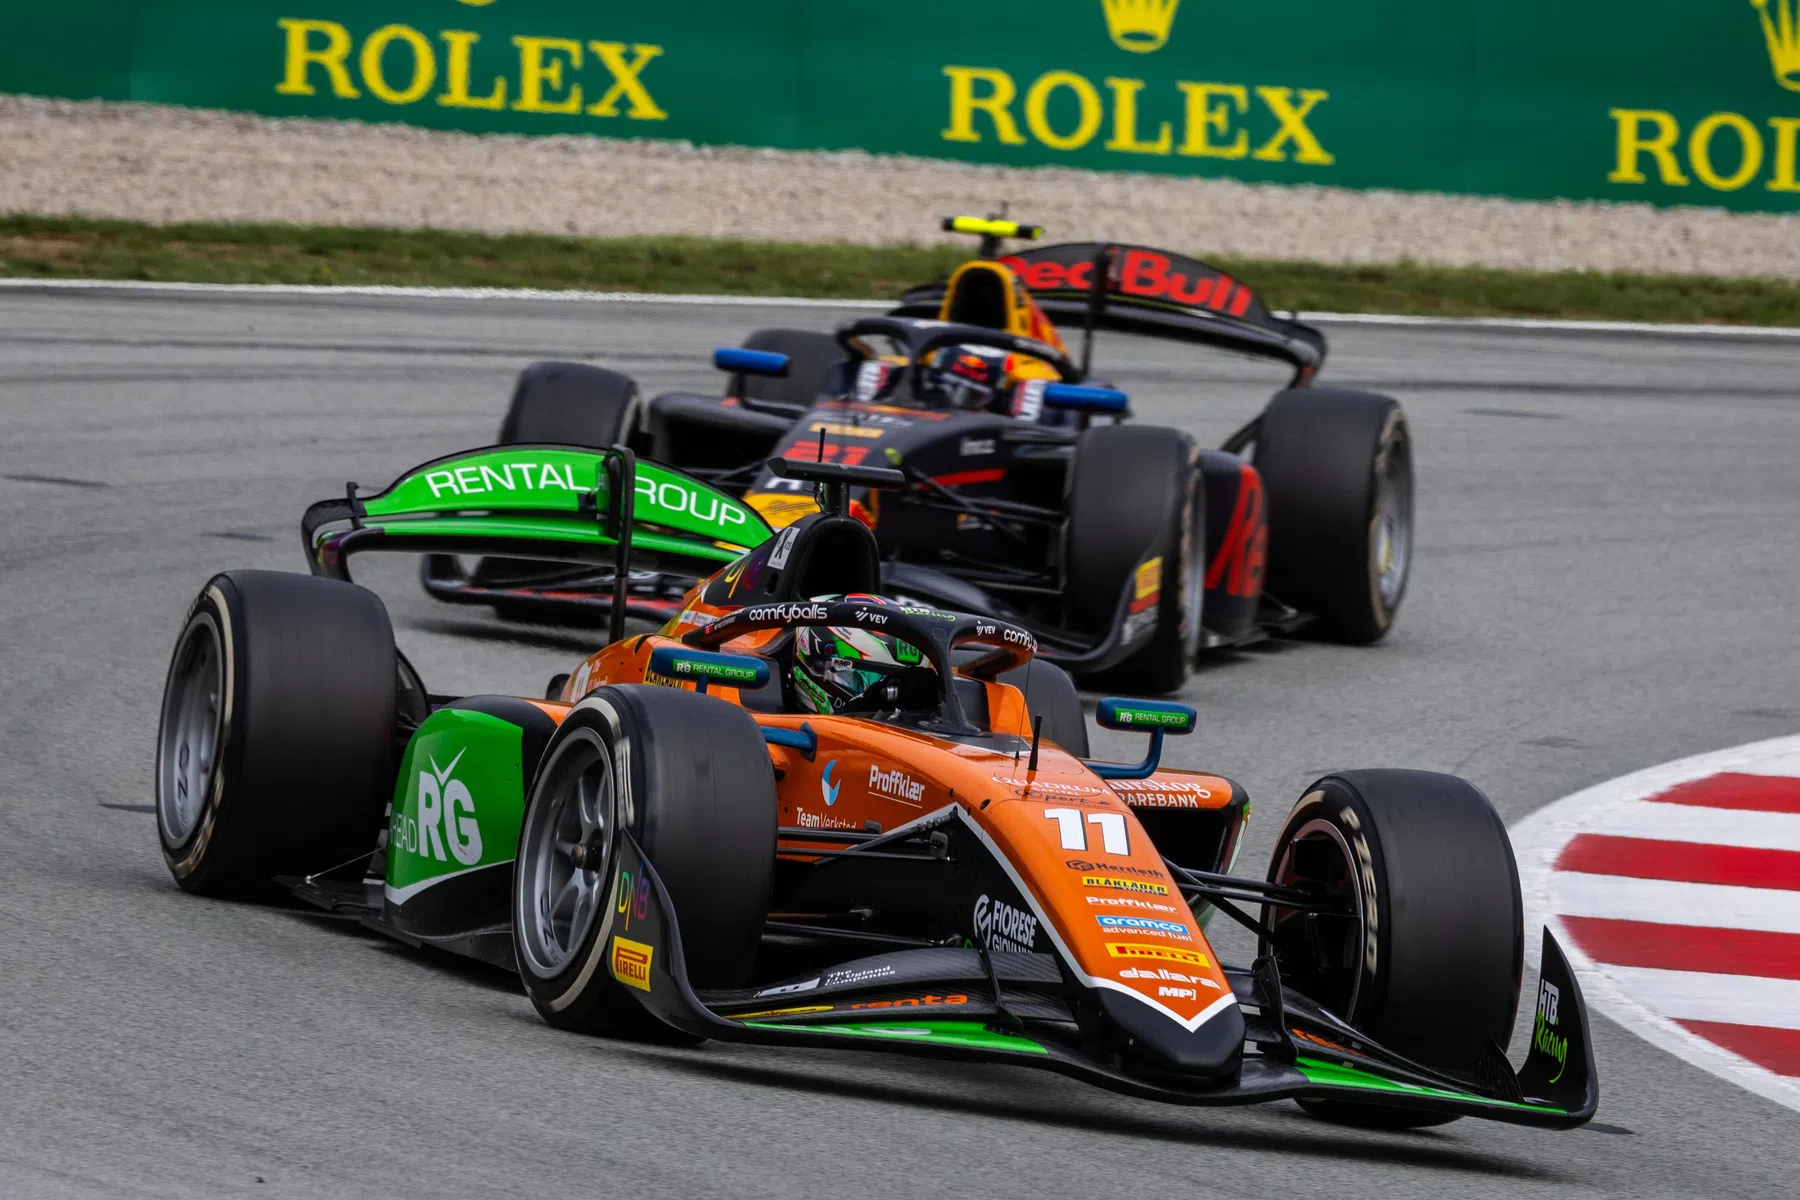 hauger takes pole position for race in Austria